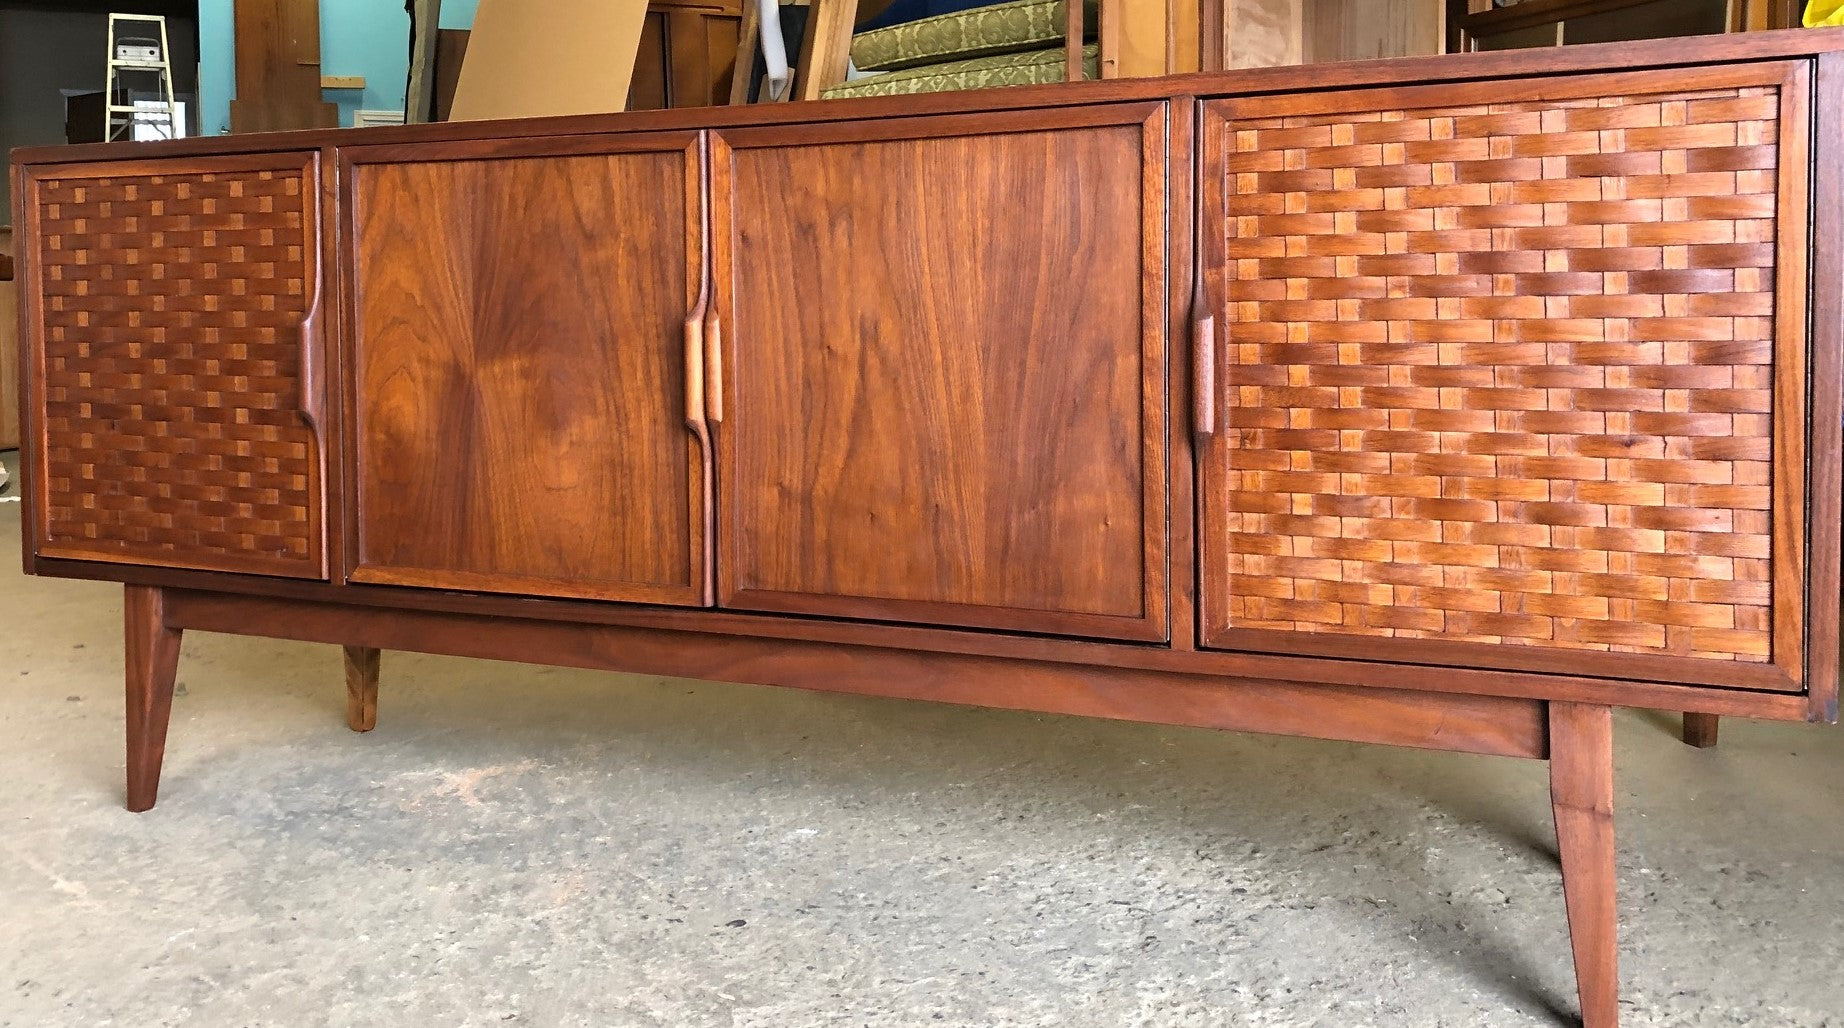 REFINISHED MCM Walnut Credenza with woven front PERFECT, 6ft - Mid Century Modern Toronto